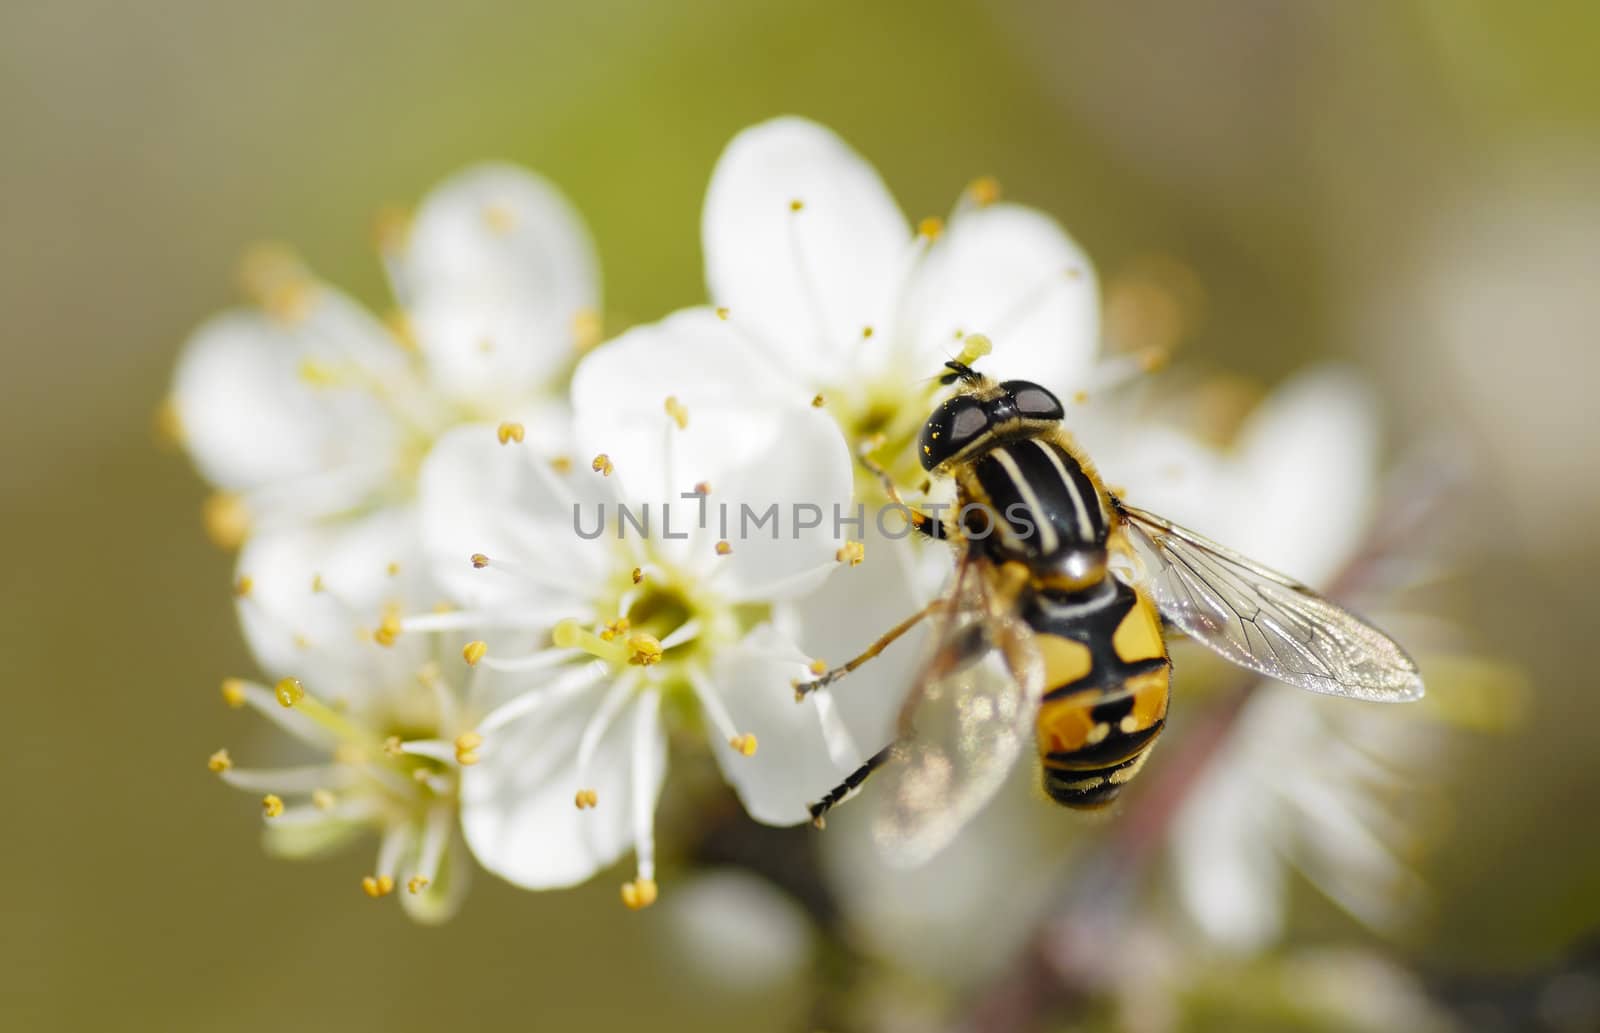 Macro Photograph of one Hoverfly gathering pollen from white blossom. Focus on eyes.